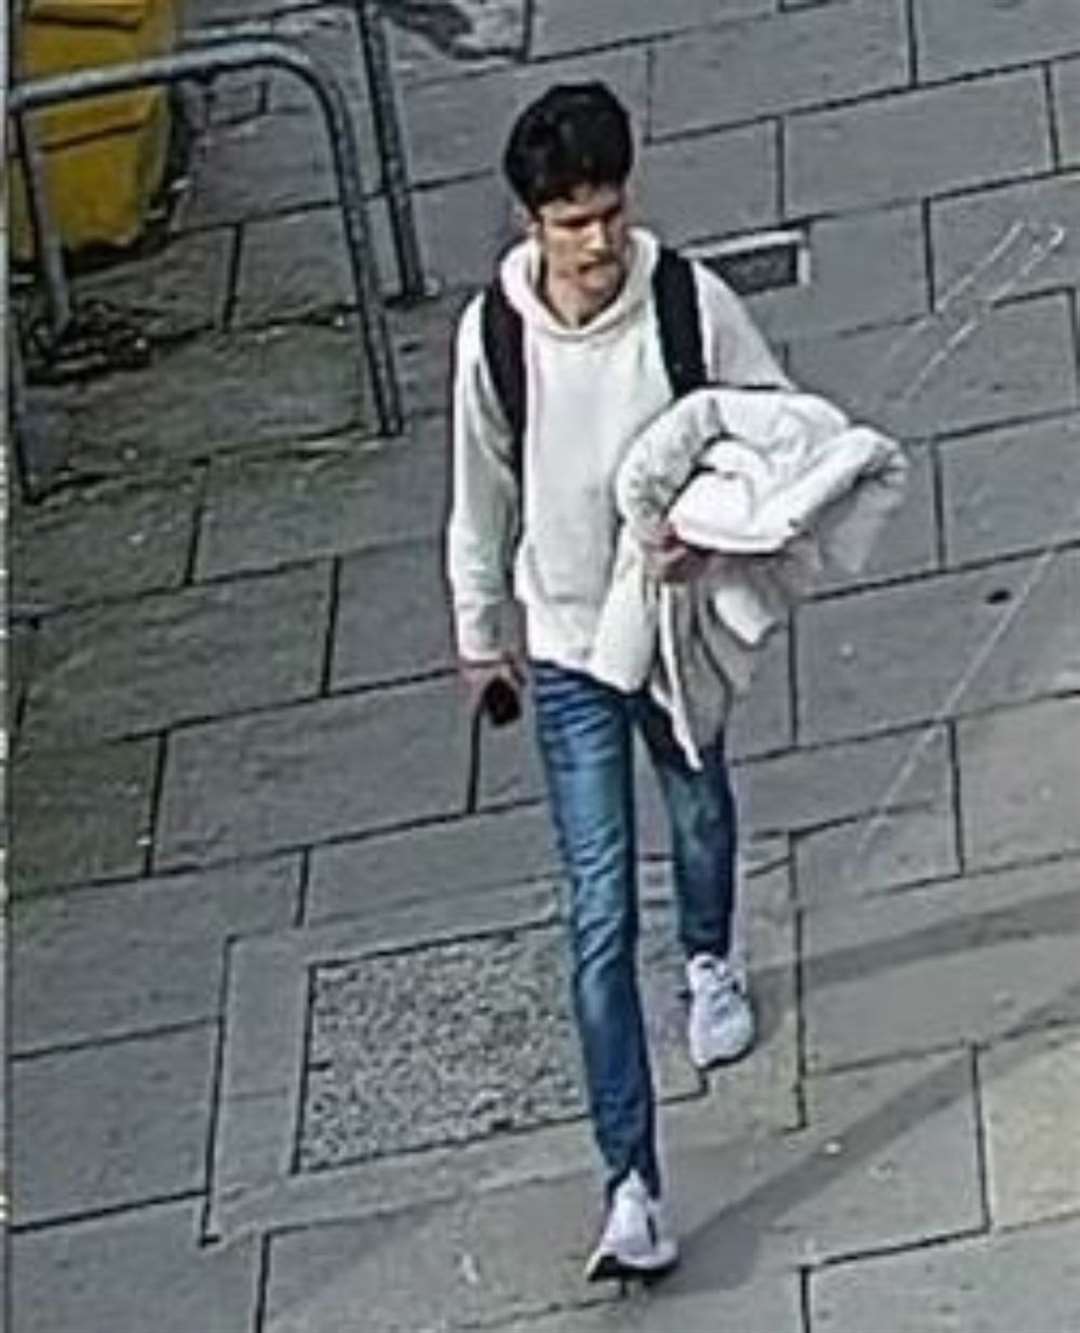 A search for Umar Khan was launched on Tuesday (Police Scotland/PA)